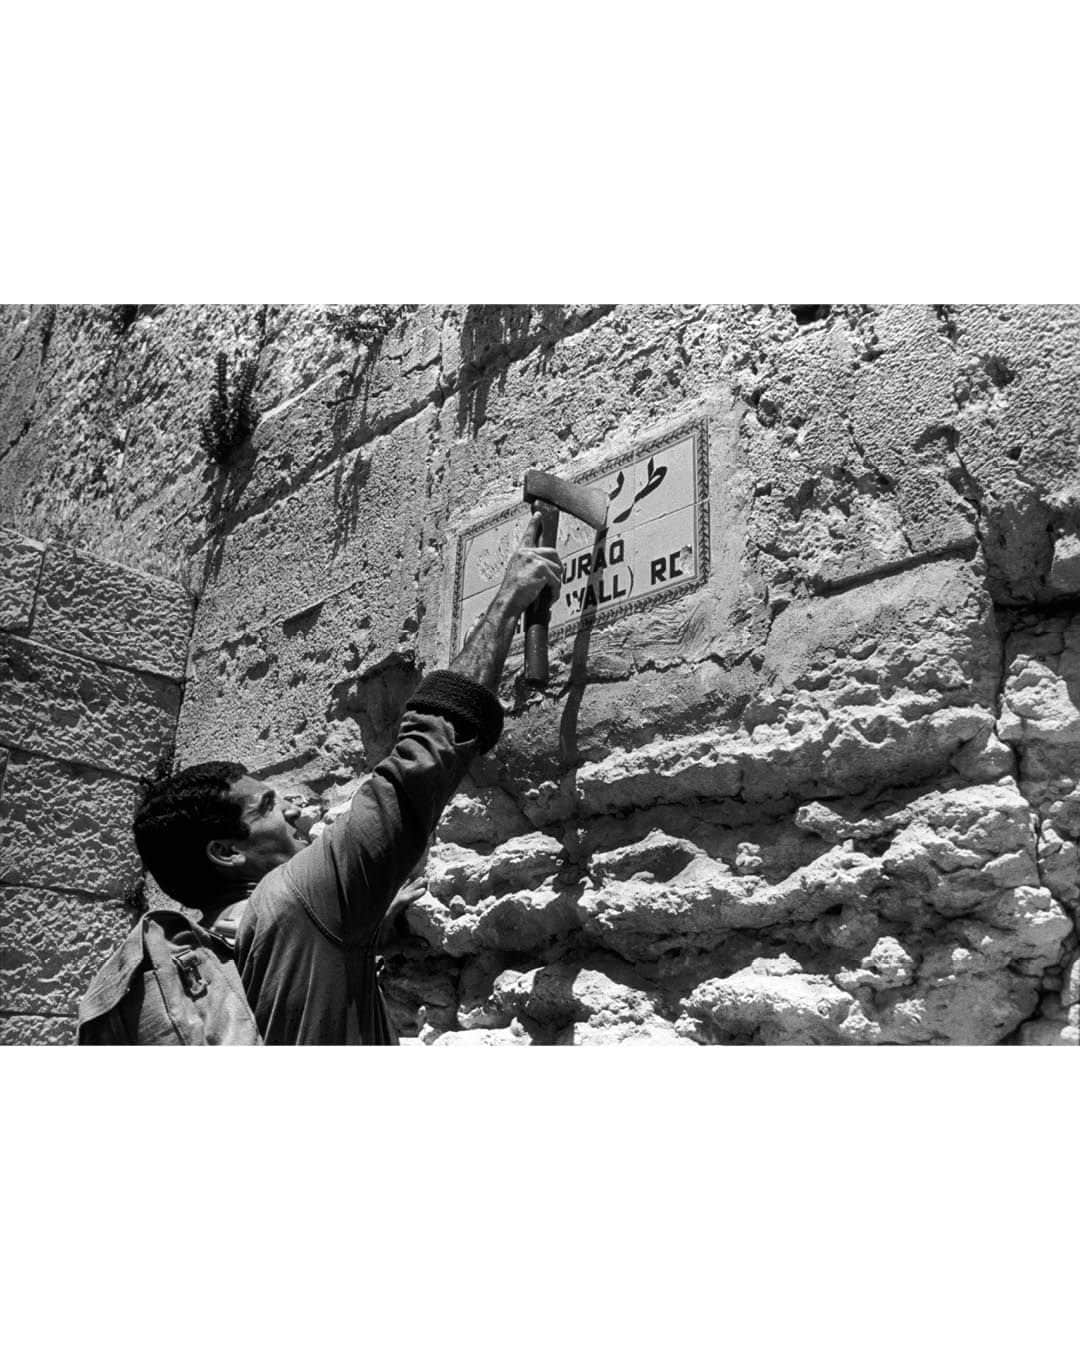 Magnum Photosさんのインスタグラム写真 - (Magnum PhotosInstagram)「A selection of images from the Magnum archive relating to Israel, Palestine and the surrounding areas, dating back eighty years.  Magnum photographers have covered several key moments in the decades-long history of conflict and tension between Israel and Palestine, starting with @philippe_halsman_official’s photographs from 1936 showing tension building in Mandatory Palestine and continuing up until October 2023, with recently published work by @william.keo, @jeromesessini and @pvanagtmael from Israel and the West Bank.  🔗 View the full selection at the link in the @magnumphotos bio.  Magnum Photos stands for the freedom of the press and against the targeting or silencing of journalists in the field.  PHOTOS (left to right):  (1) The British Army and Palestine Police force searching passers-by in Jaffa during the Arab Revolt. Jaffa. 1936. © @philippe_halsman_official / Magnum Photos  (2) Two Palestinian girls reading in a refugee camp in the Jordan Valley. Jordan. 1952. © @georgerodgerphotos / Magnum Photos  (3) Israeli soldier in East Jerusalem knocks out the Arab sign naming the Wailing Wall as “Al-Buraq Wall.” 1967. © @michabaram.archive / Magnum Photos  (4) Woman with a rifle guards a flock of sheep on a Kibbutz. Golan Heights. 1973. © @thomashoepker / Magnum Photos  (5) Palestinians demonstrate for peace with olive branches next to Israeli Border Guards. West Bank. 1991. © @abbas.photos / Magnum Photos  (6) Young Palestinian man loading stone into a homemade catapult. West Bank. 2000 © Larry Towell / Magnum Photos  (7) Palestinian evicted from his home (left) by the Israelis because of its close vicinity to the ‘Security’ wall. Bethlehem, West Bank. 2005. © @marktpower / Magnum Photos  (8) Funeral of Avraham Walz, 29, killed in an attack earlier that day by a Palestinian in a stolen digger. Jerusalem. 2014. © Peter van Agtmael (@pvanagtmael) / Magnum Photos  (9) Clashes between Palestinian youth and Israeli forces following US president Donald Trump’s statement on Jerusalem status. Ramallah, West Bank. 2017. © @paolopellegrin / Magnum Photos  (10) Front door of a house is pierced by bullets. Kibbutz Kfar Aza, Israel. 2023. © @william.keo / Magnum Photos」11月28日 23時02分 - magnumphotos